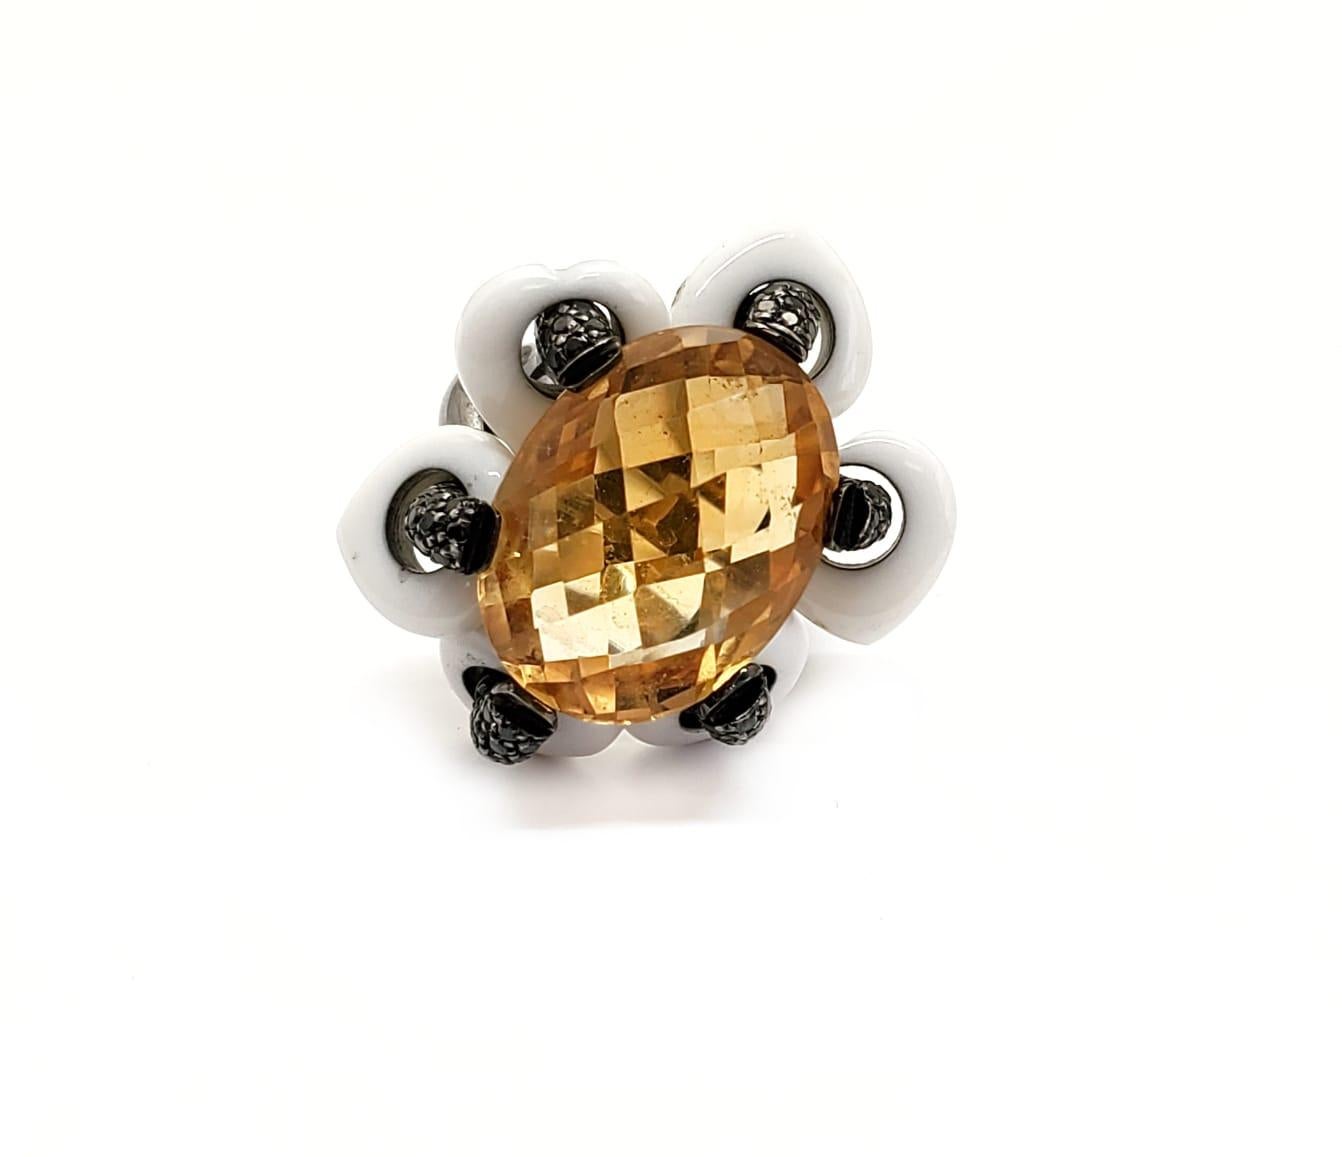 Andreoli White Agate Black Diamond Citrine Flower Moving Petals Ring 18KT Gold Cocktail. This Ring Features, 0.90 carats of full round cut black Diamonds. The center stone is a 18.18 carat Citrine checker diamond briolette cut pattern with white